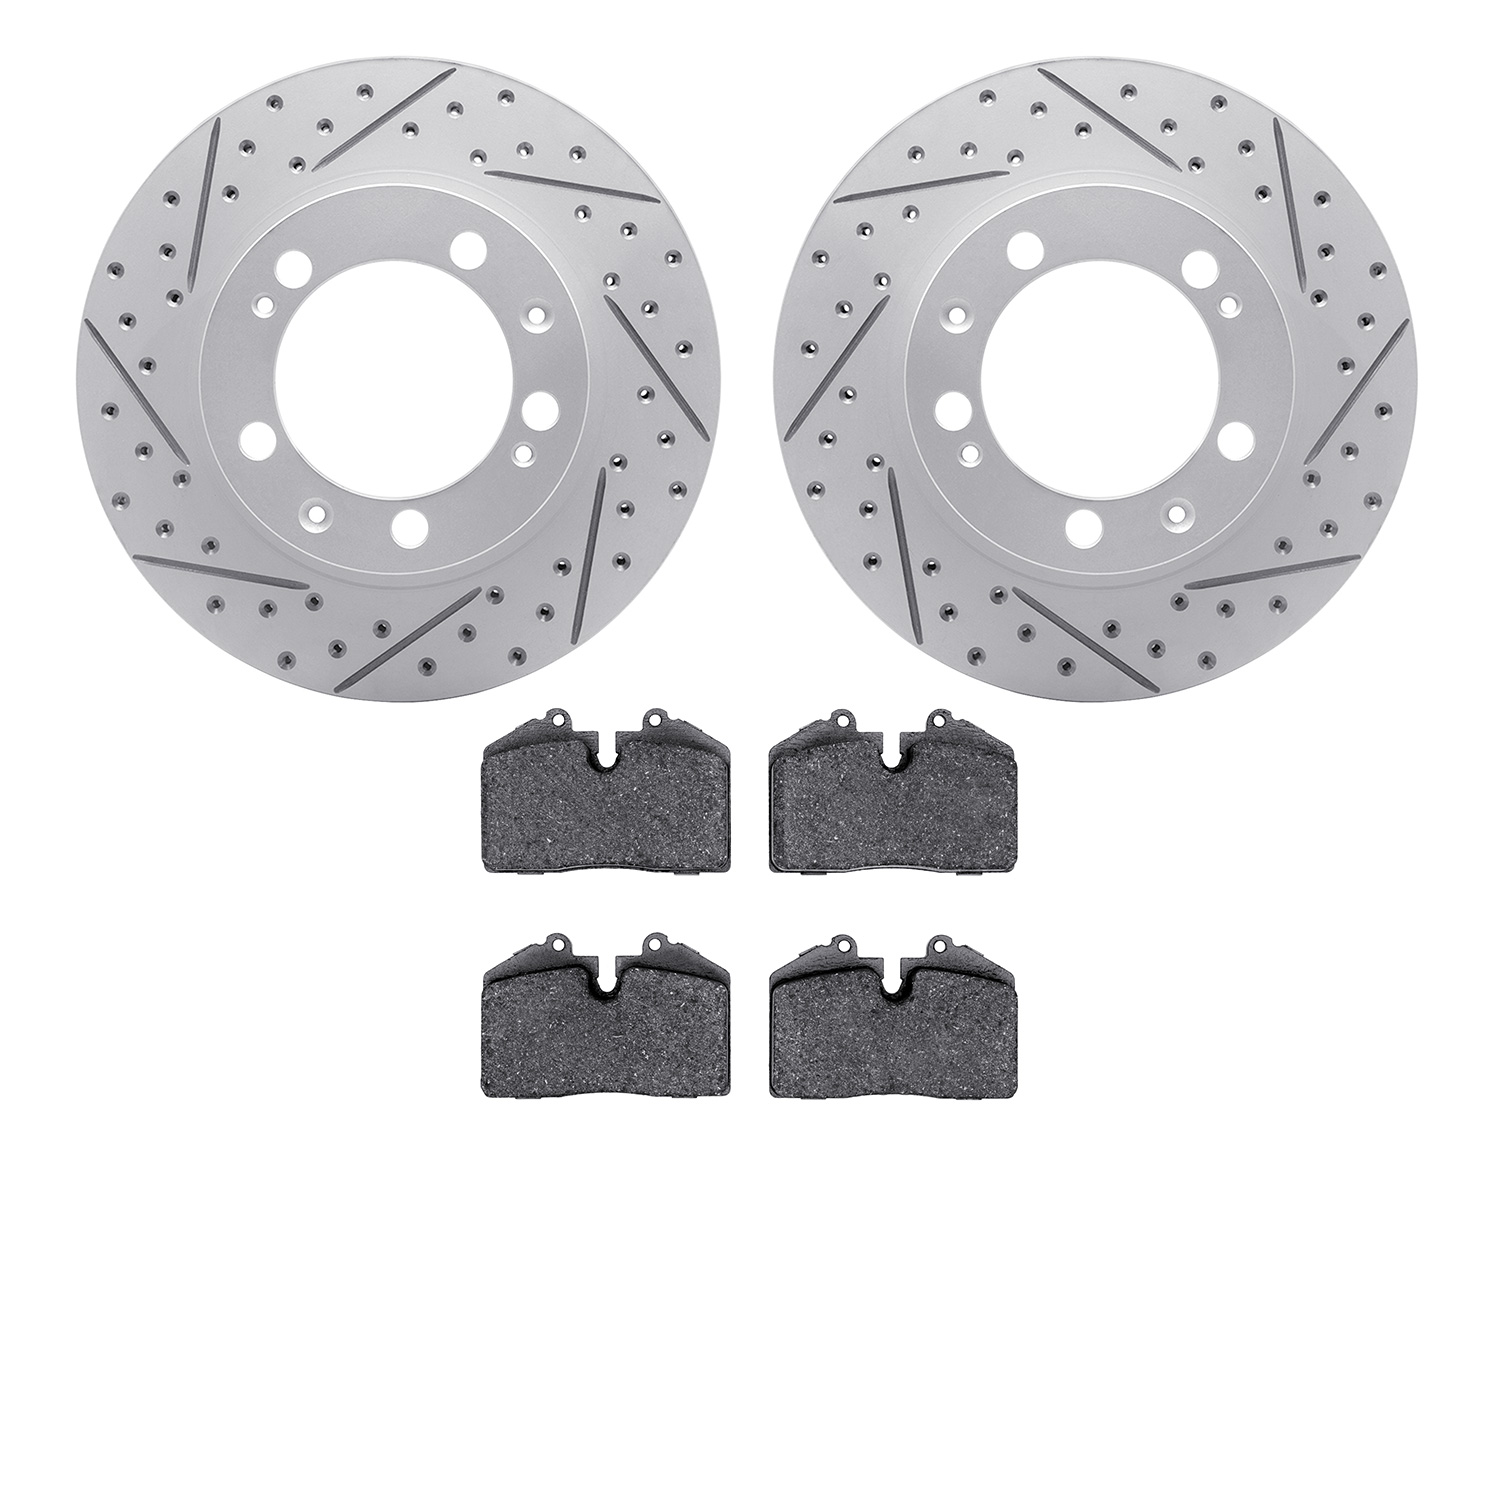 2502-02015 Geoperformance Drilled/Slotted Rotors w/5000 Advanced Brake Pads Kit, 1989-1997 Porsche, Position: Front